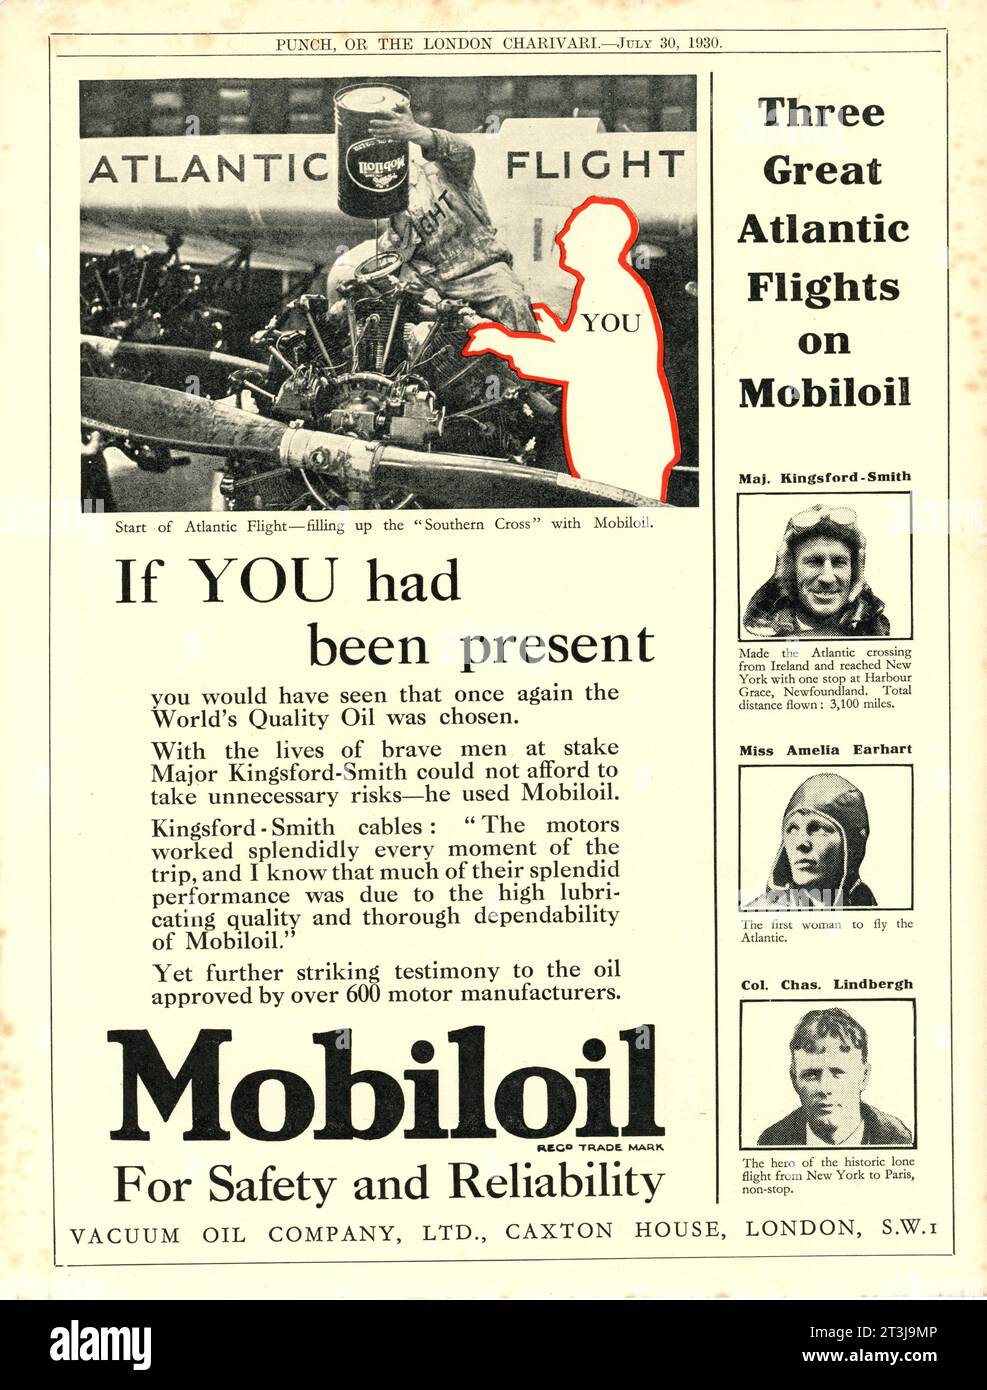 Major KINGSFORD-SMITH Miss AMELIA EARHART and Colonel CHARLES LINDBERGH Three Great Atlantic Flights on MOBILOIL The Quality Oil 1930 British Magazine Advertisement Stock Photo